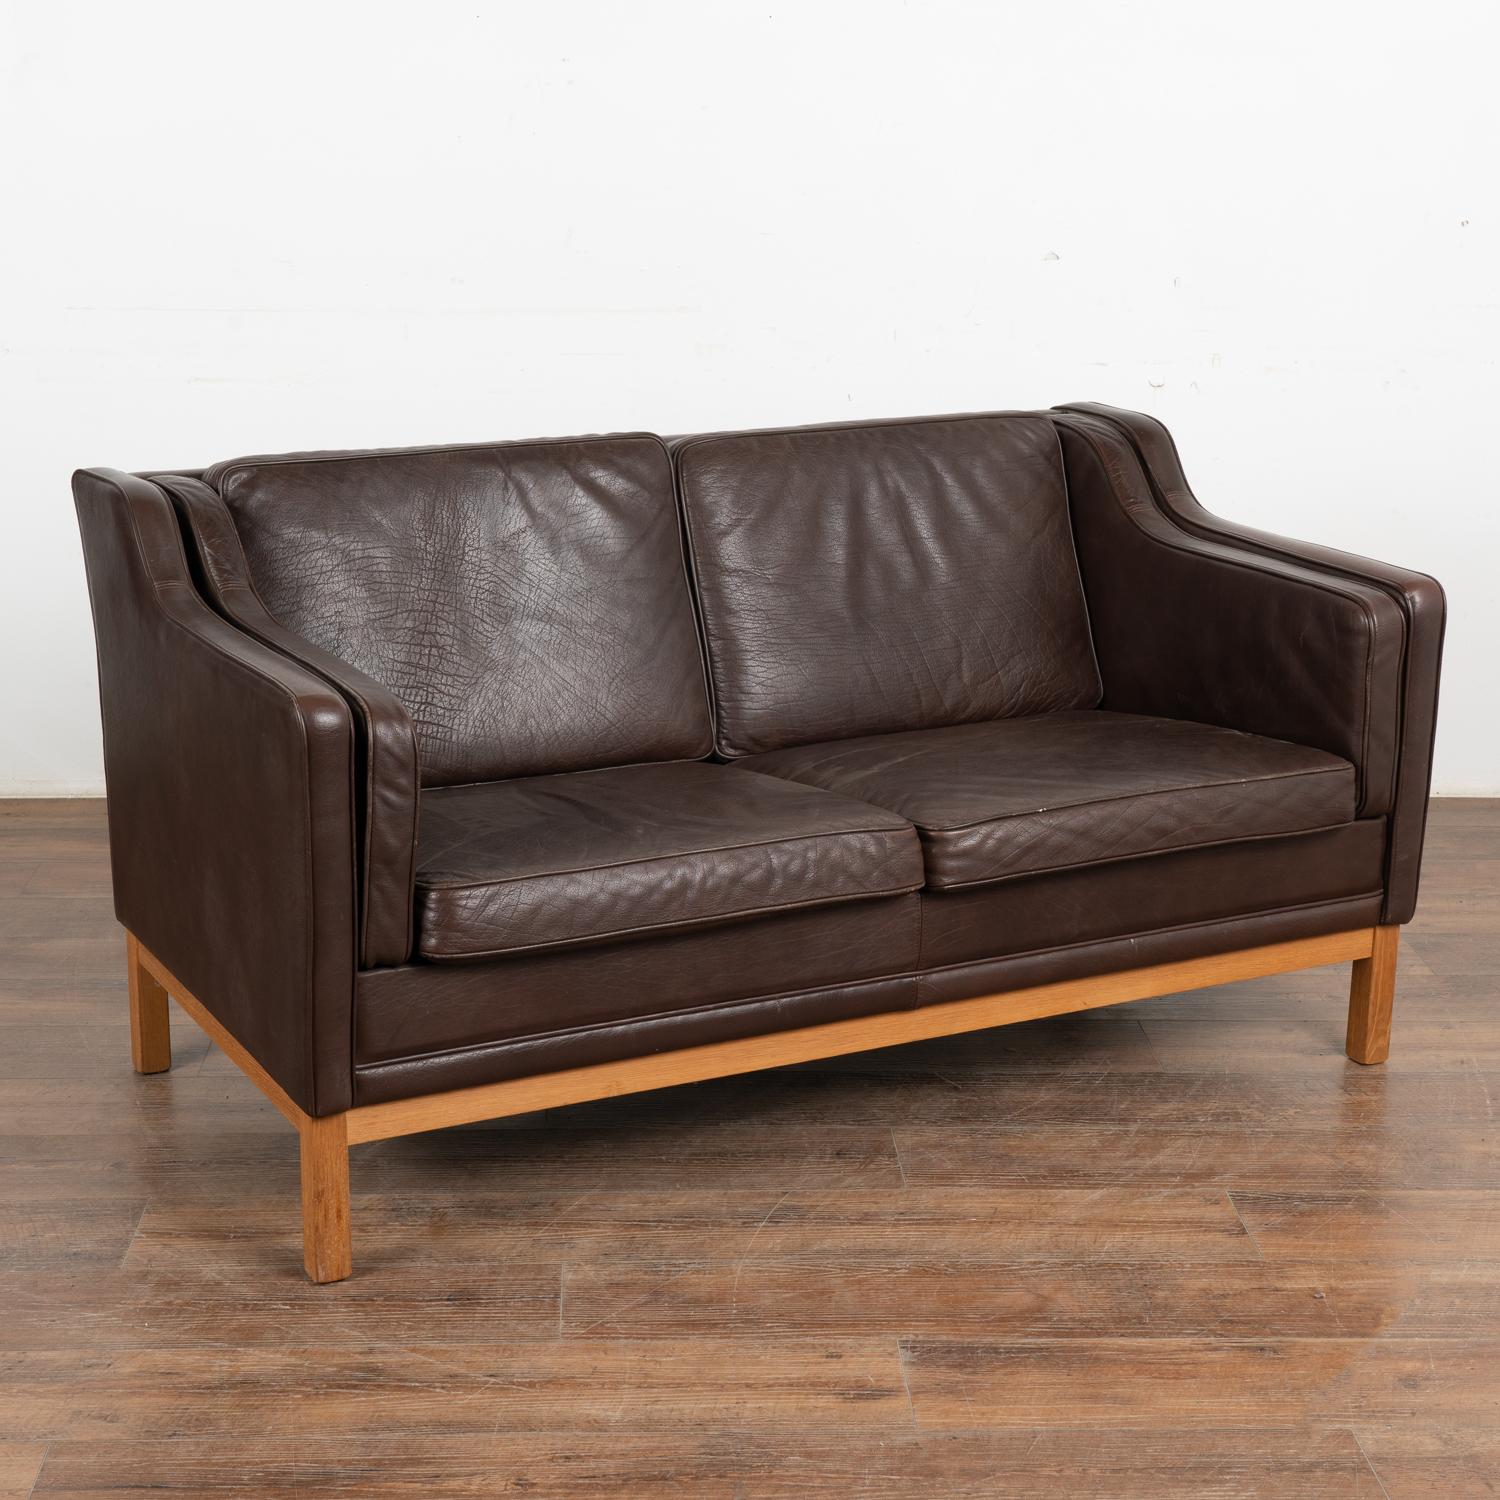 Mid-century modern vintage two seat brown leather sofa or loveseat from Denmark. This comfortable sofa combines tradition with modern lines.
Upholstered in dark brown leather, loose cushions, hardwood legs in stained beech wood. 
Sold in used